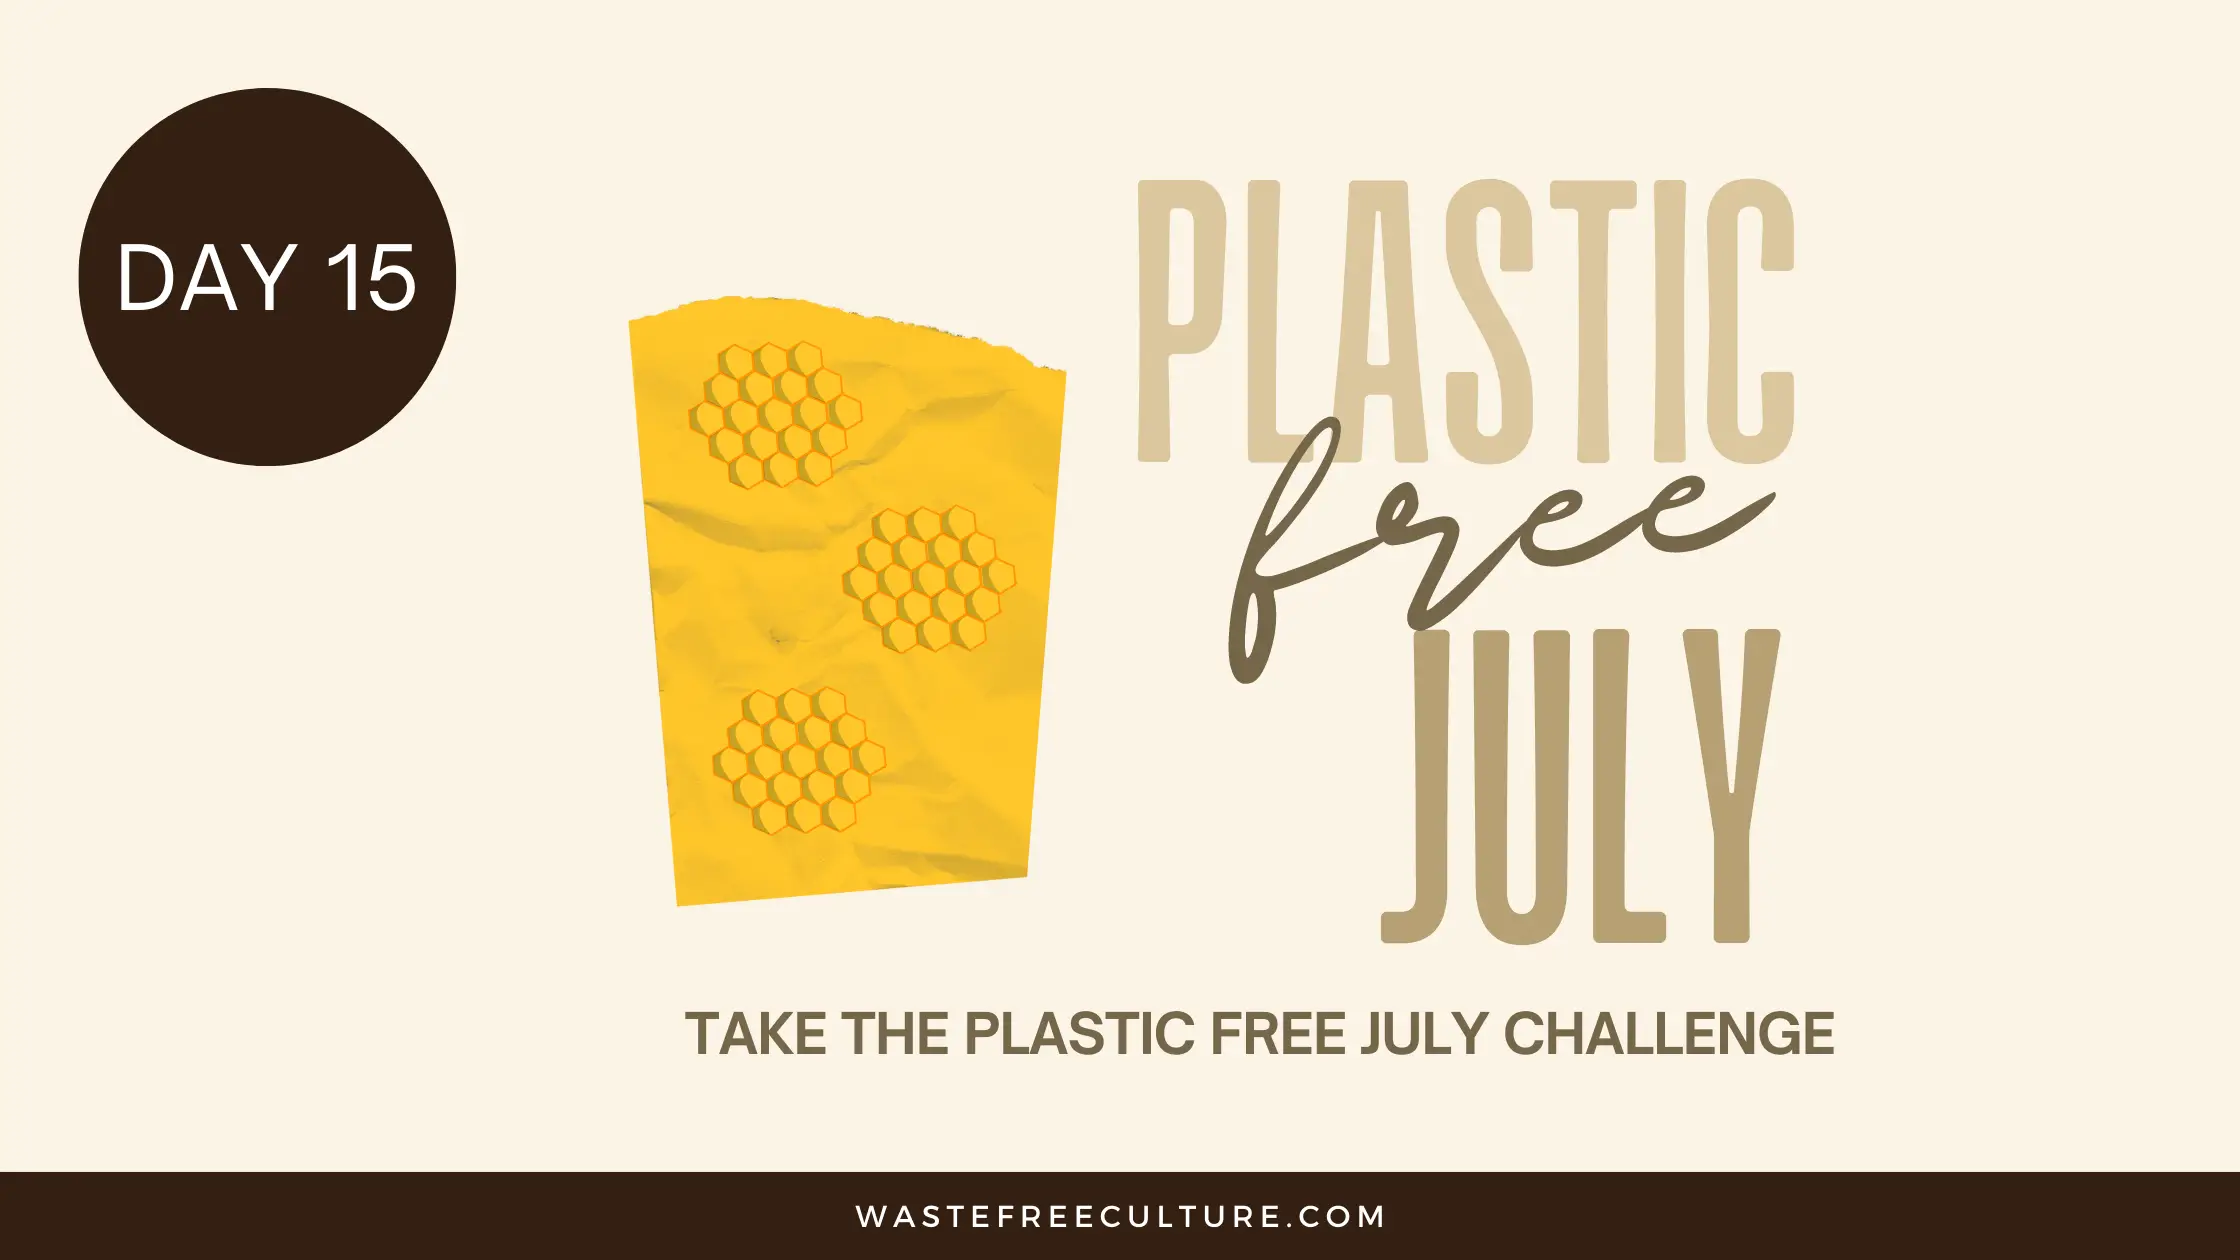 Day 15 of the Plastic Free July Challenge